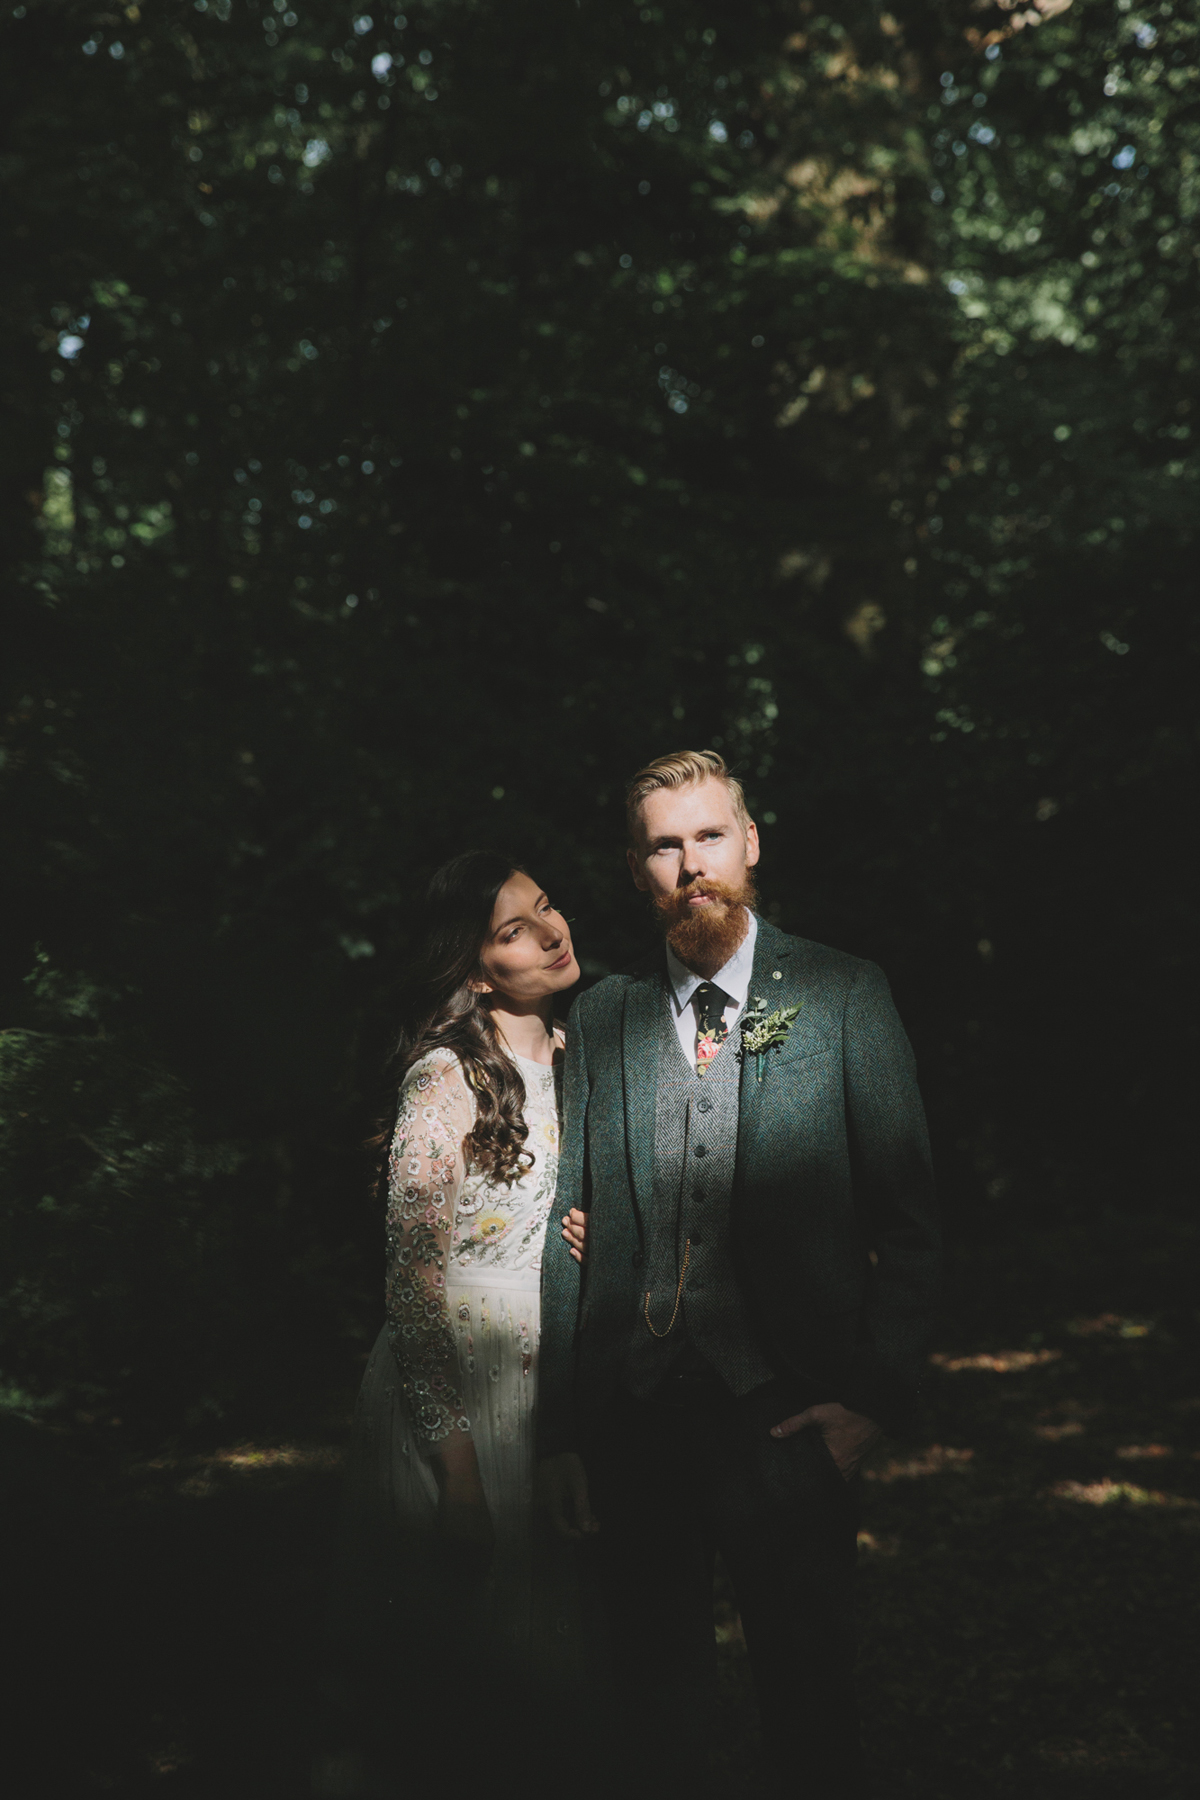 69 Bride in a Needle Thread gown and a Groom with a handlebar moustache and ASOS suit standing in woodland image by McKinley Rodgers